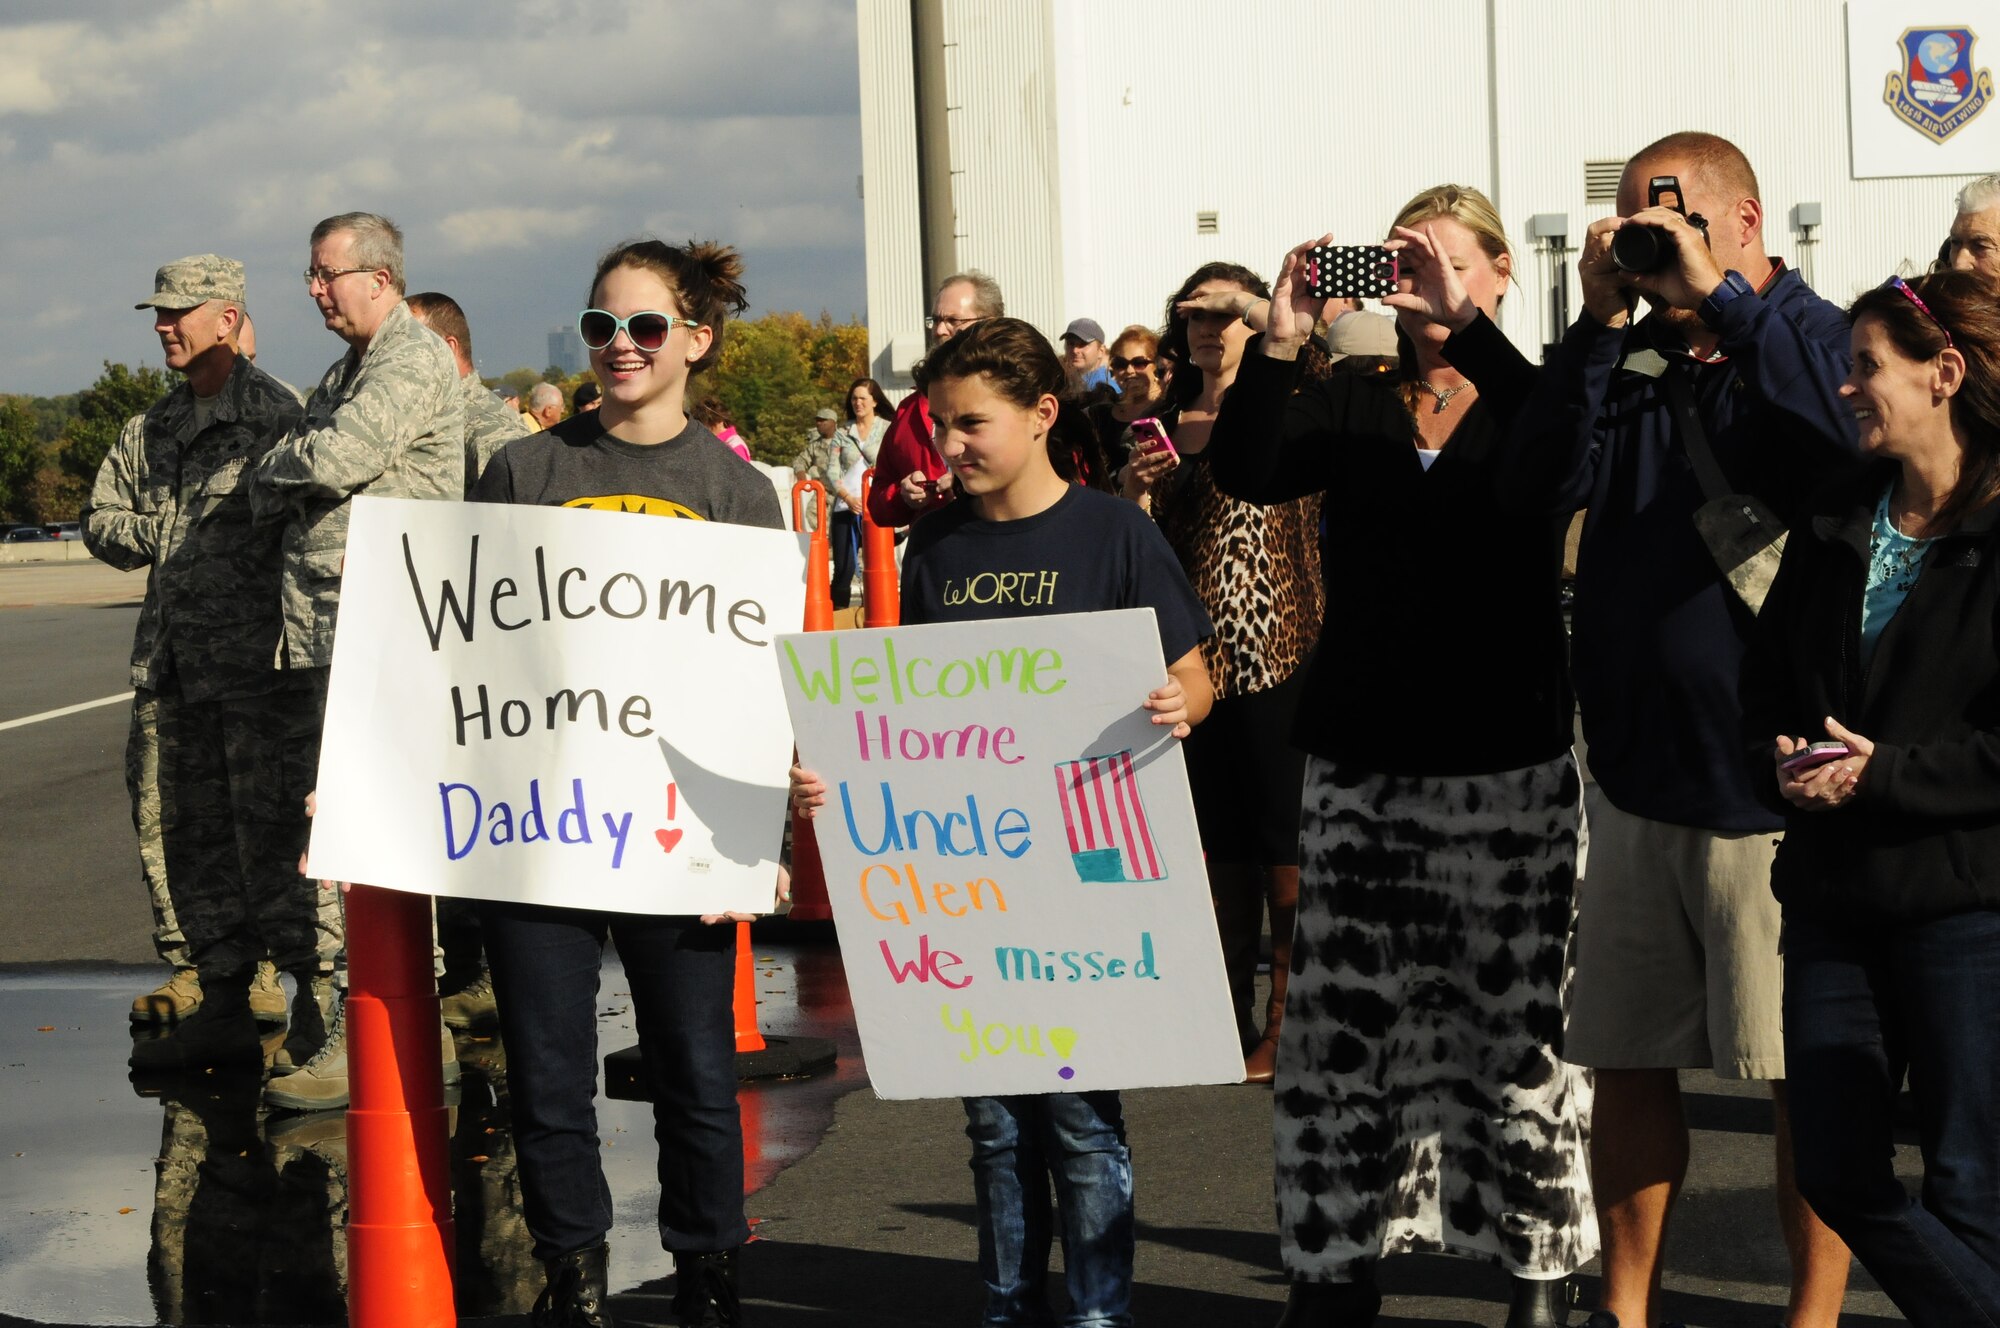 Family members and friends eagerly await the arrival of airmen from the 145th Airlift Wing as they return home to the North Carolina Air National Guard base, Charlotte Douglas Intl Airport, Nov 6, 2014. Over 90 airmen served 120 days while deployed to Qatar where they flew humanitarian supply air drops on Mt. Sinjar in Iraq. They conducted several resupply airdrops to the Iraqi Security Forces and engaged in battle with ISIS. (U.S. Air National Guard photo by Master Sgt. Patricia F. Moran, 145th Public Affairs/Released)